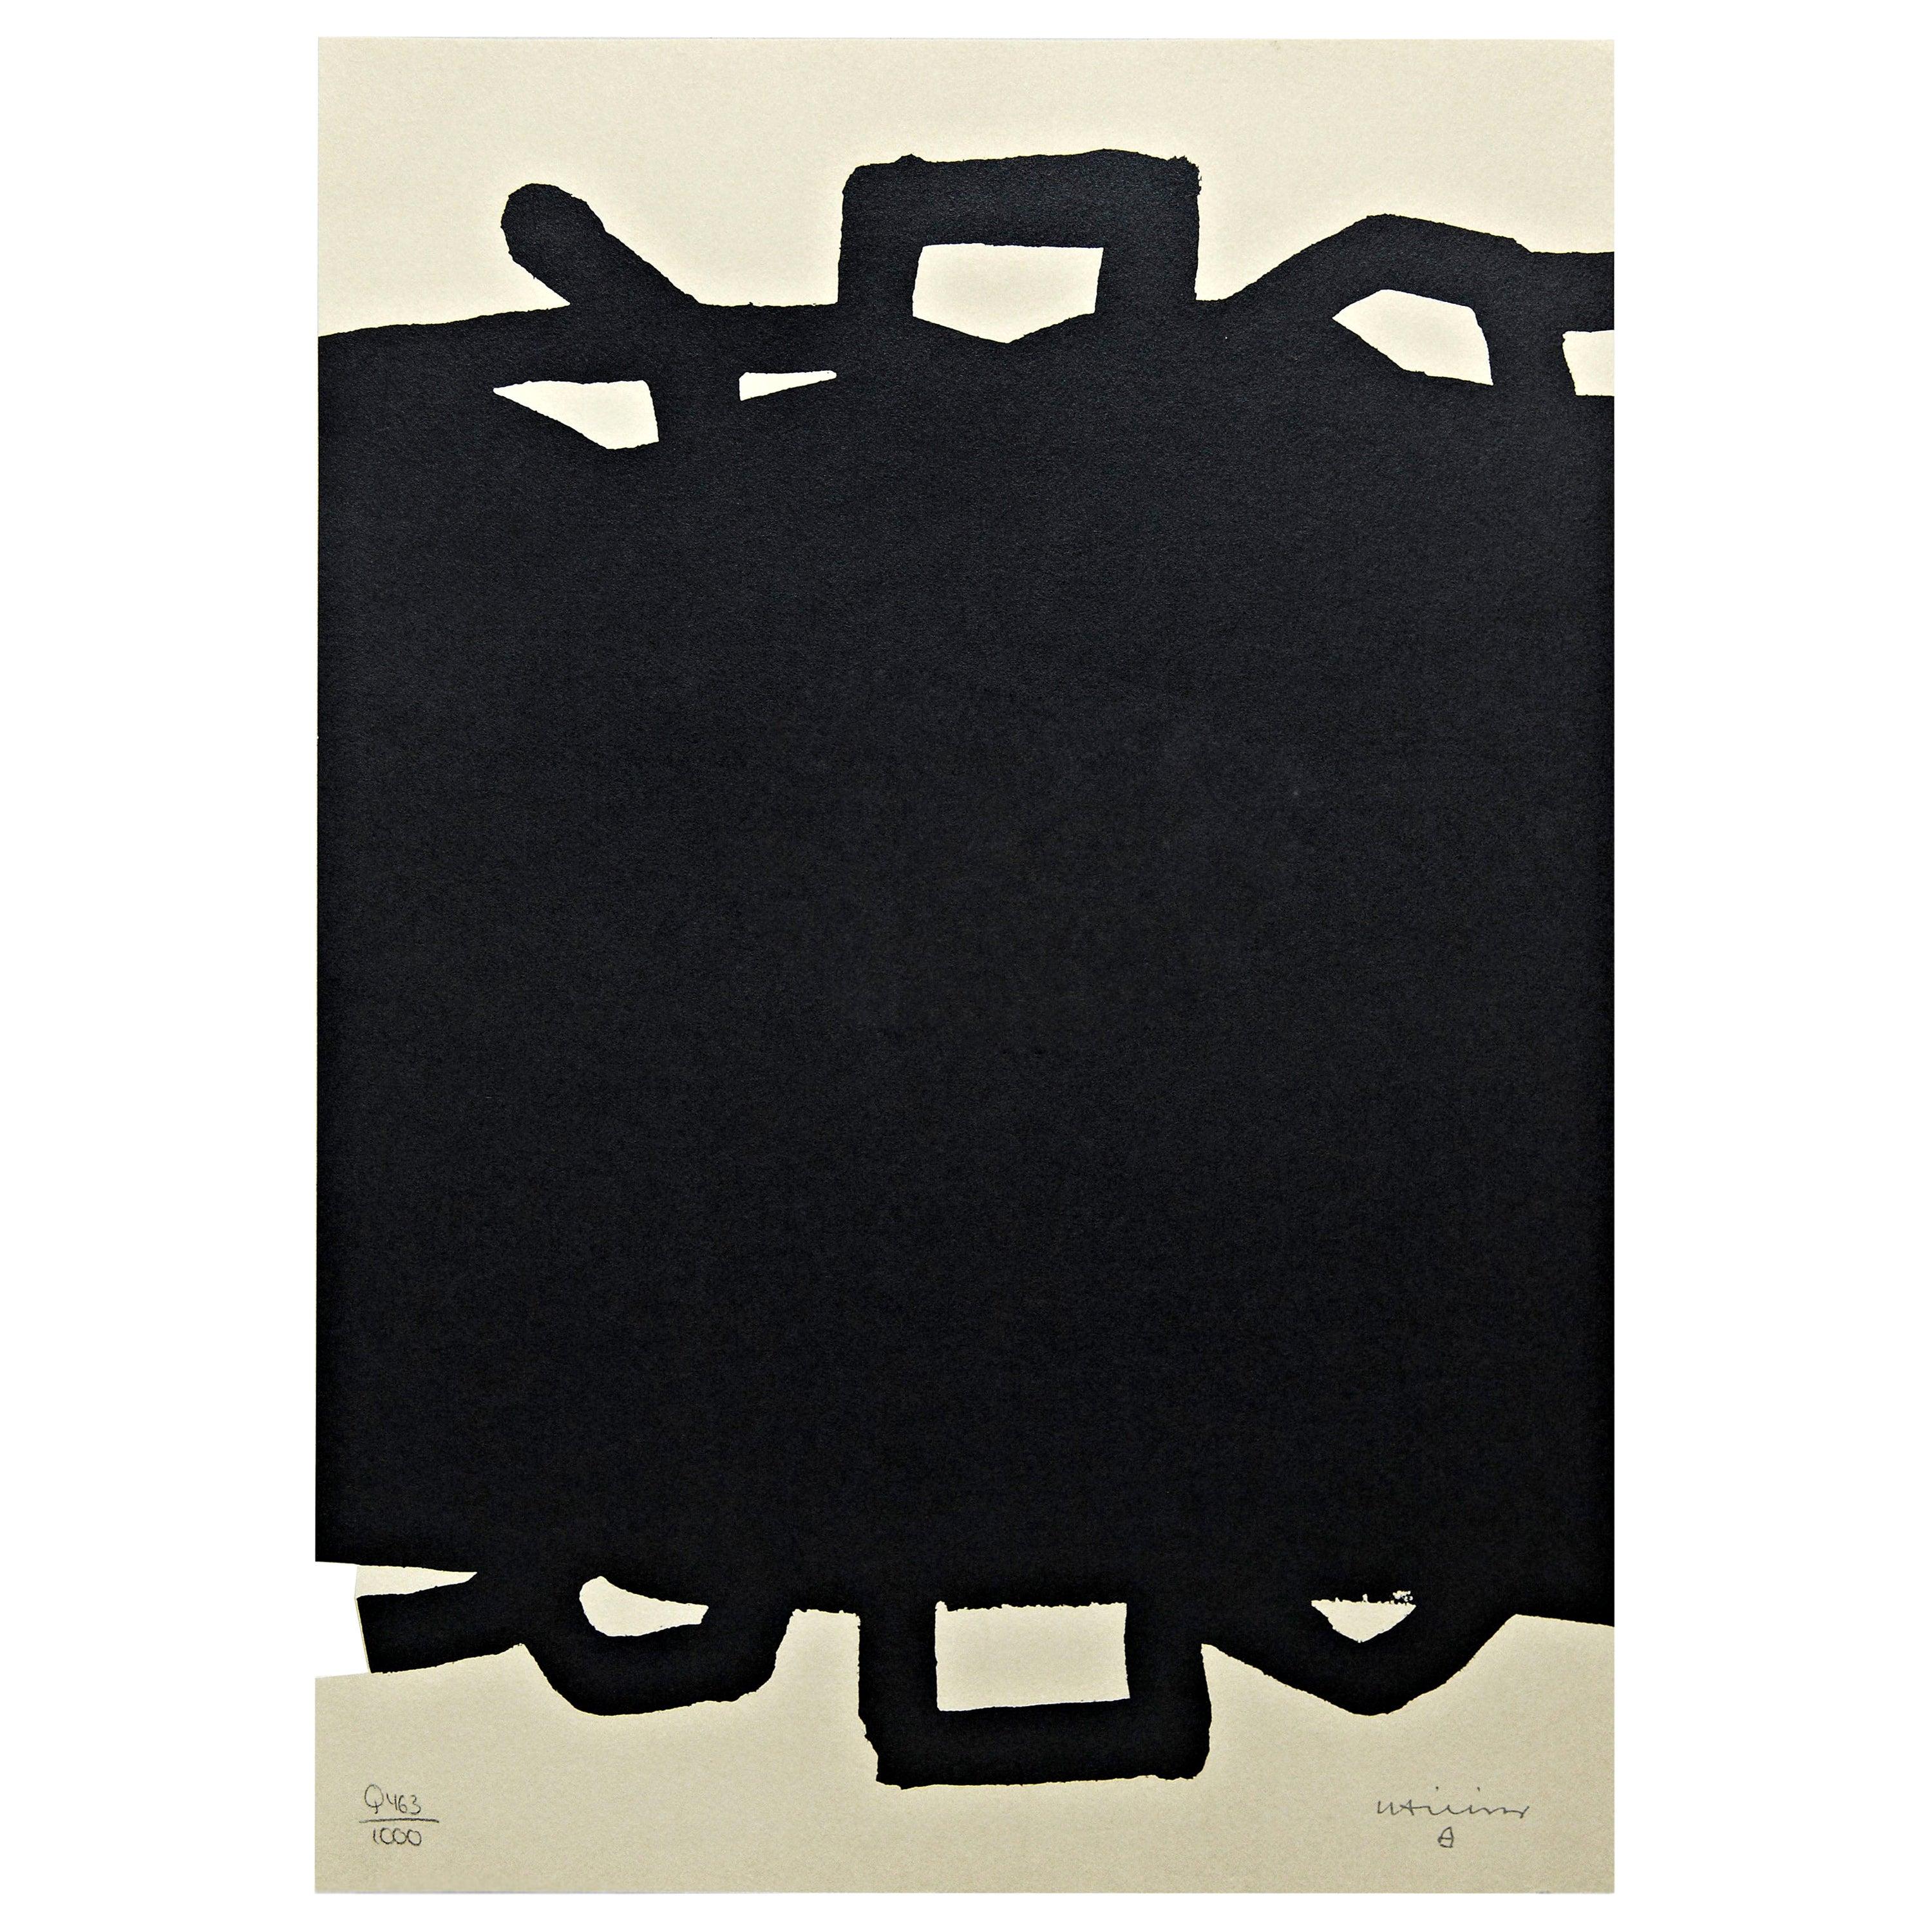 Eduardo Chillida Abstract Black Lithography "Untitled" on Paper, 1999